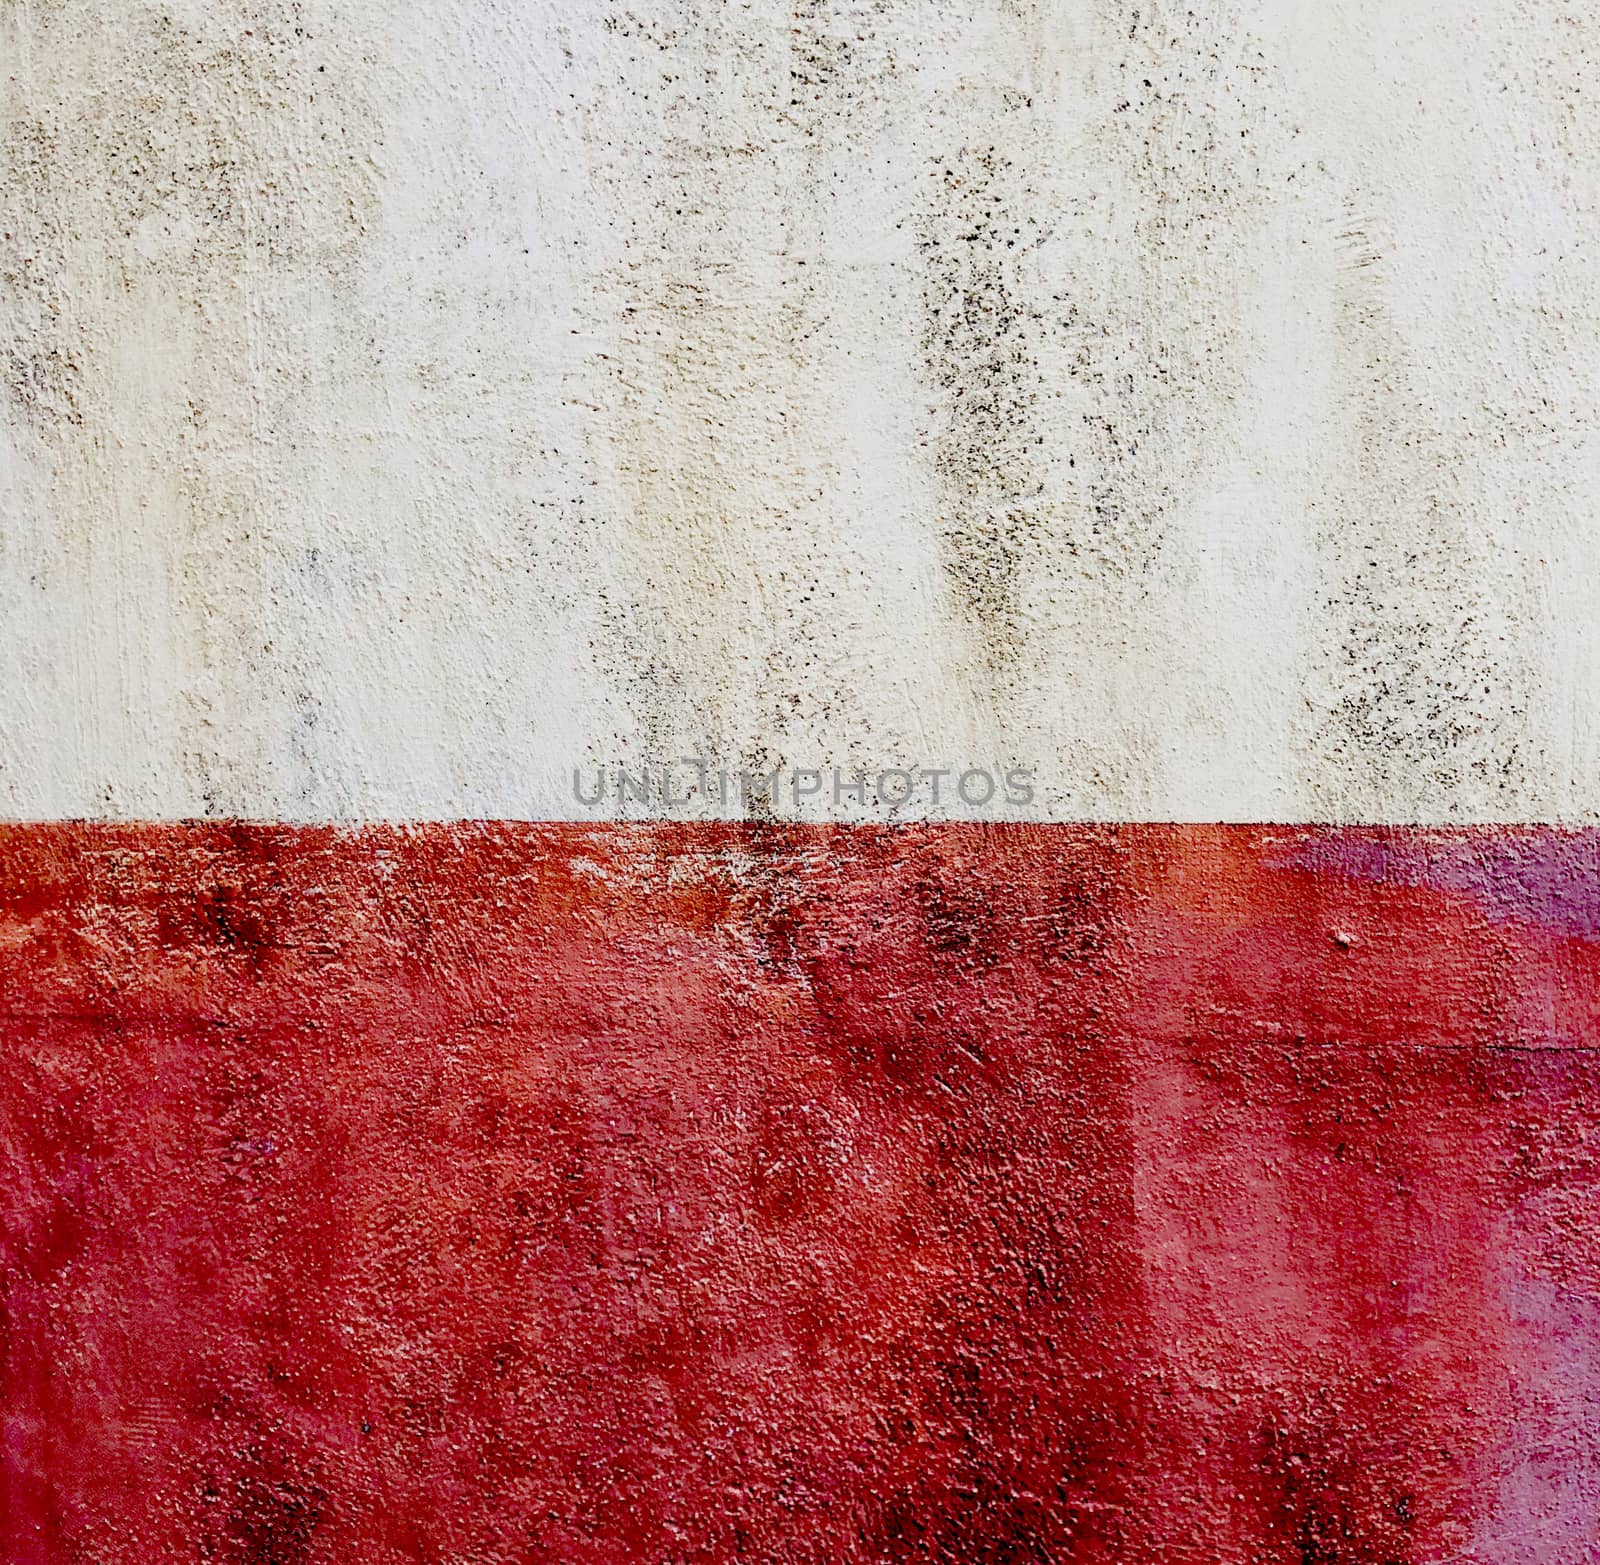 colorfull vibrant outdoor bumpy red vintage wall texture